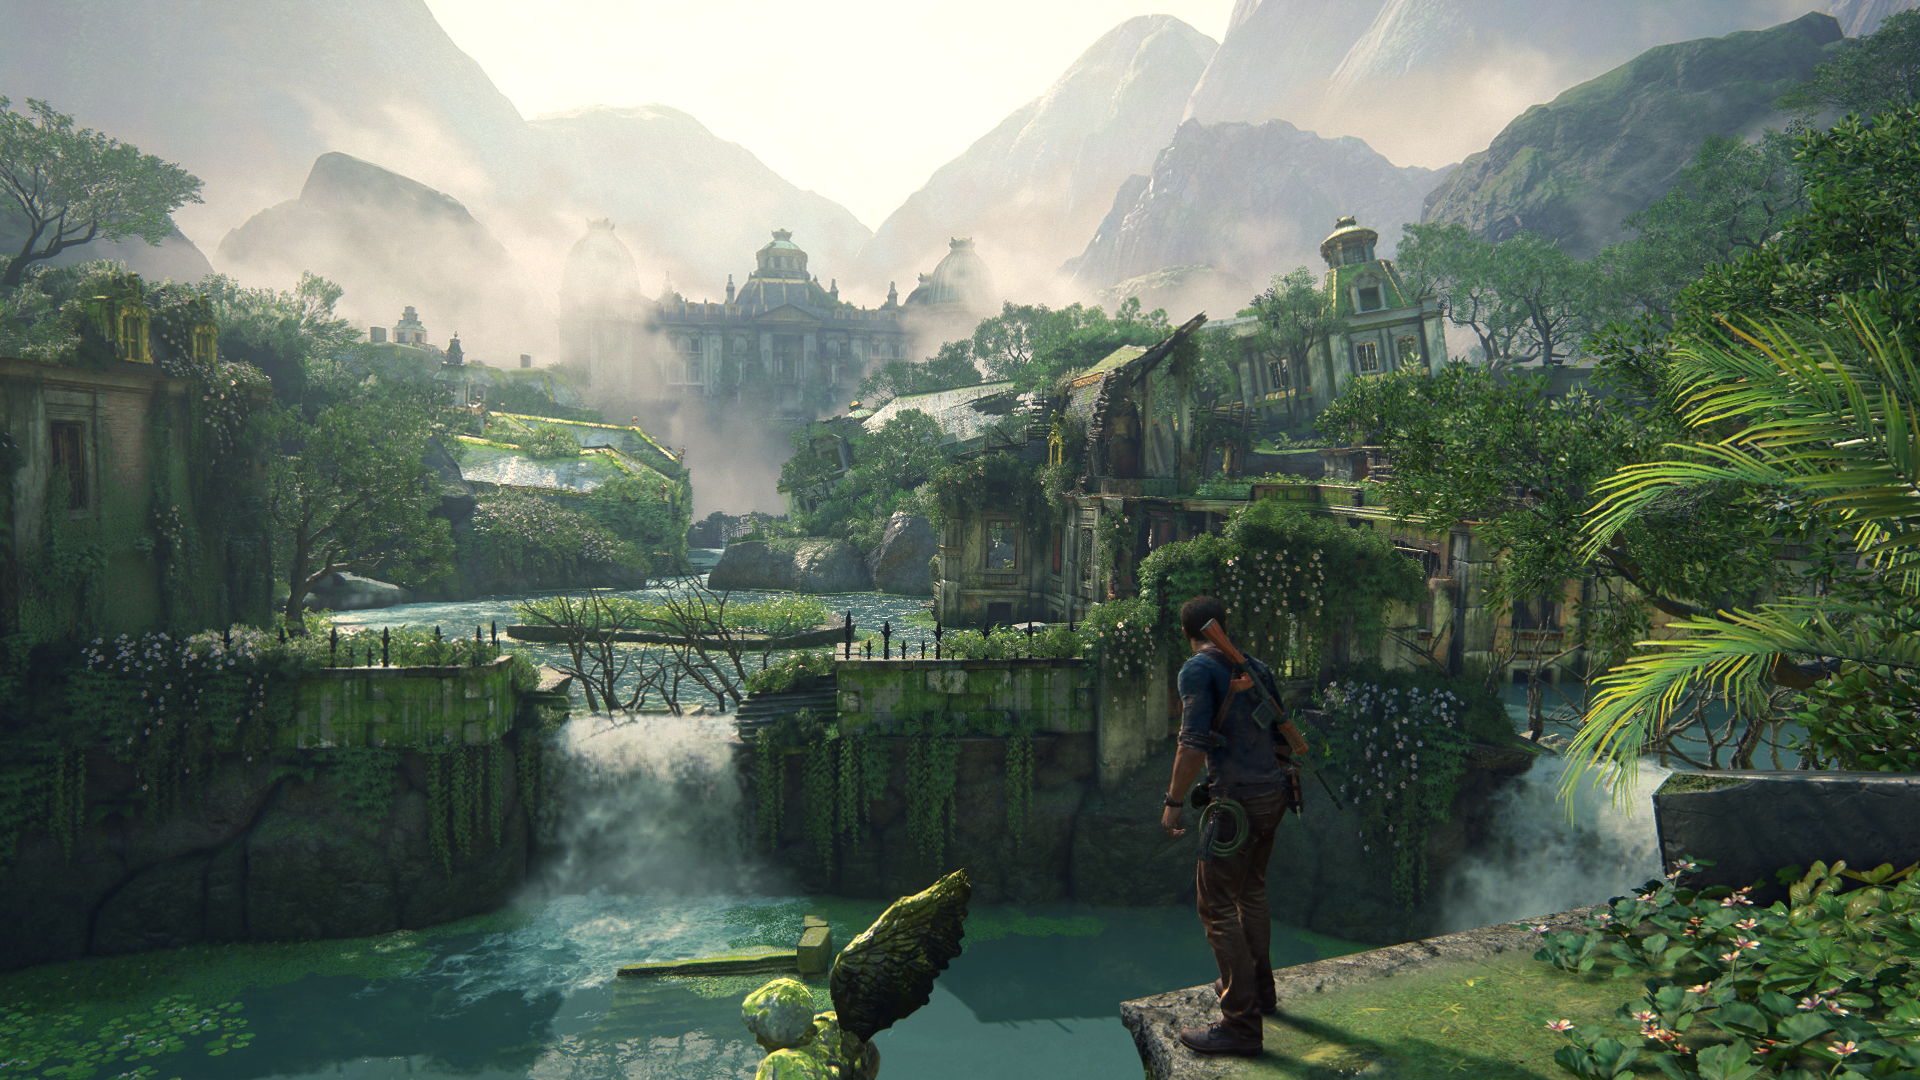 General 1920x1080 Uncharted 4: A Thief's End Nathan Drake video games Uncharted Naughty Dog video game art screen shot video game characters CGI water boys with guns gun standing leaves video game men building digital art